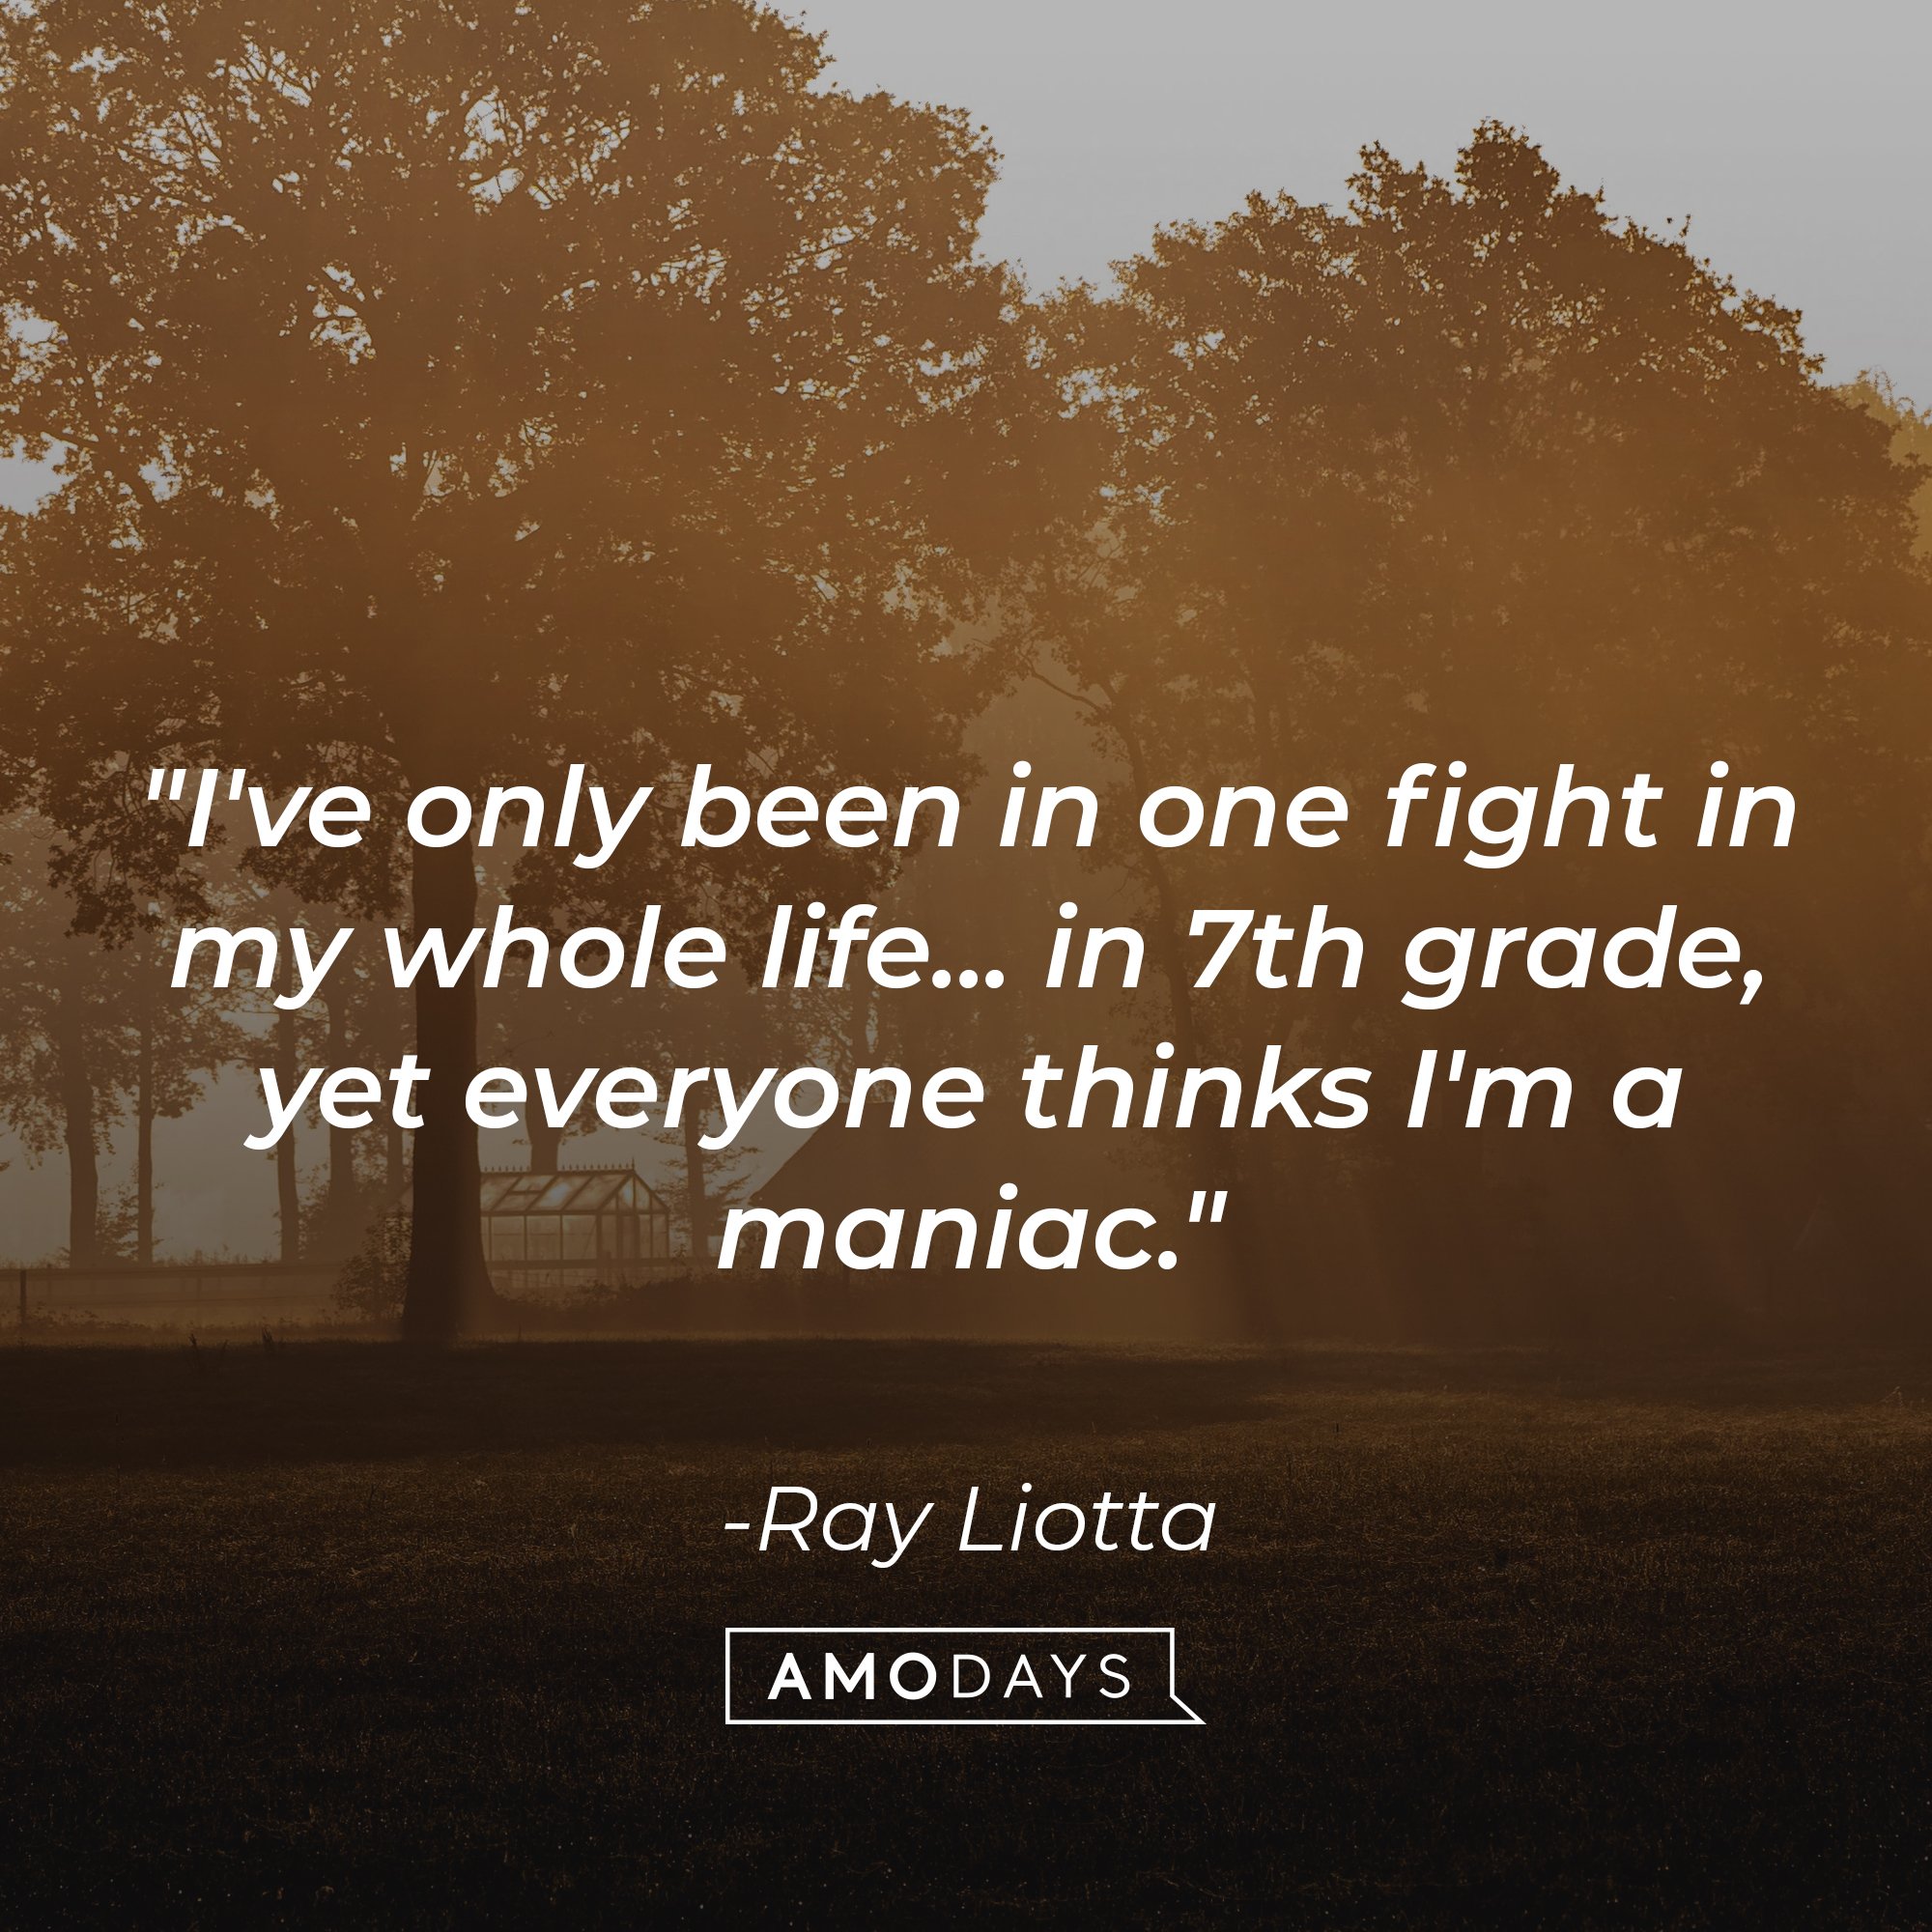 Ray Liotta’s quote: "I've only been in one fight in my whole life... in 7th grade, yet everyone thinks I'm a maniac." | Image: AmoDays